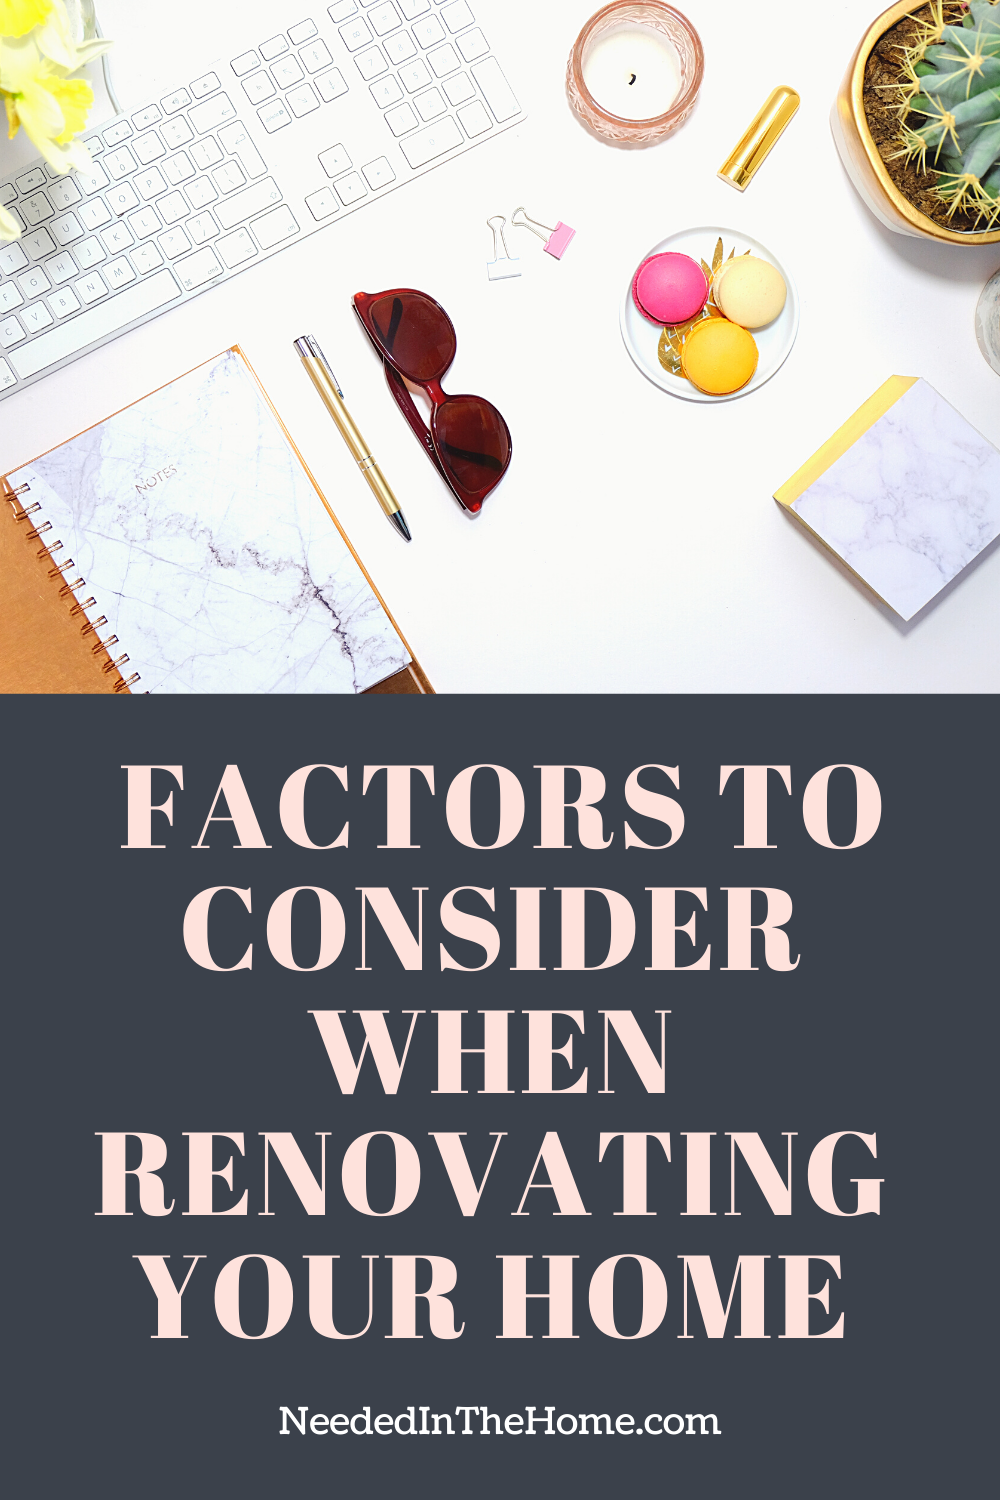 pinterest-pin-description factors to consider when renovating your home keyboard desk planner neededinthehome